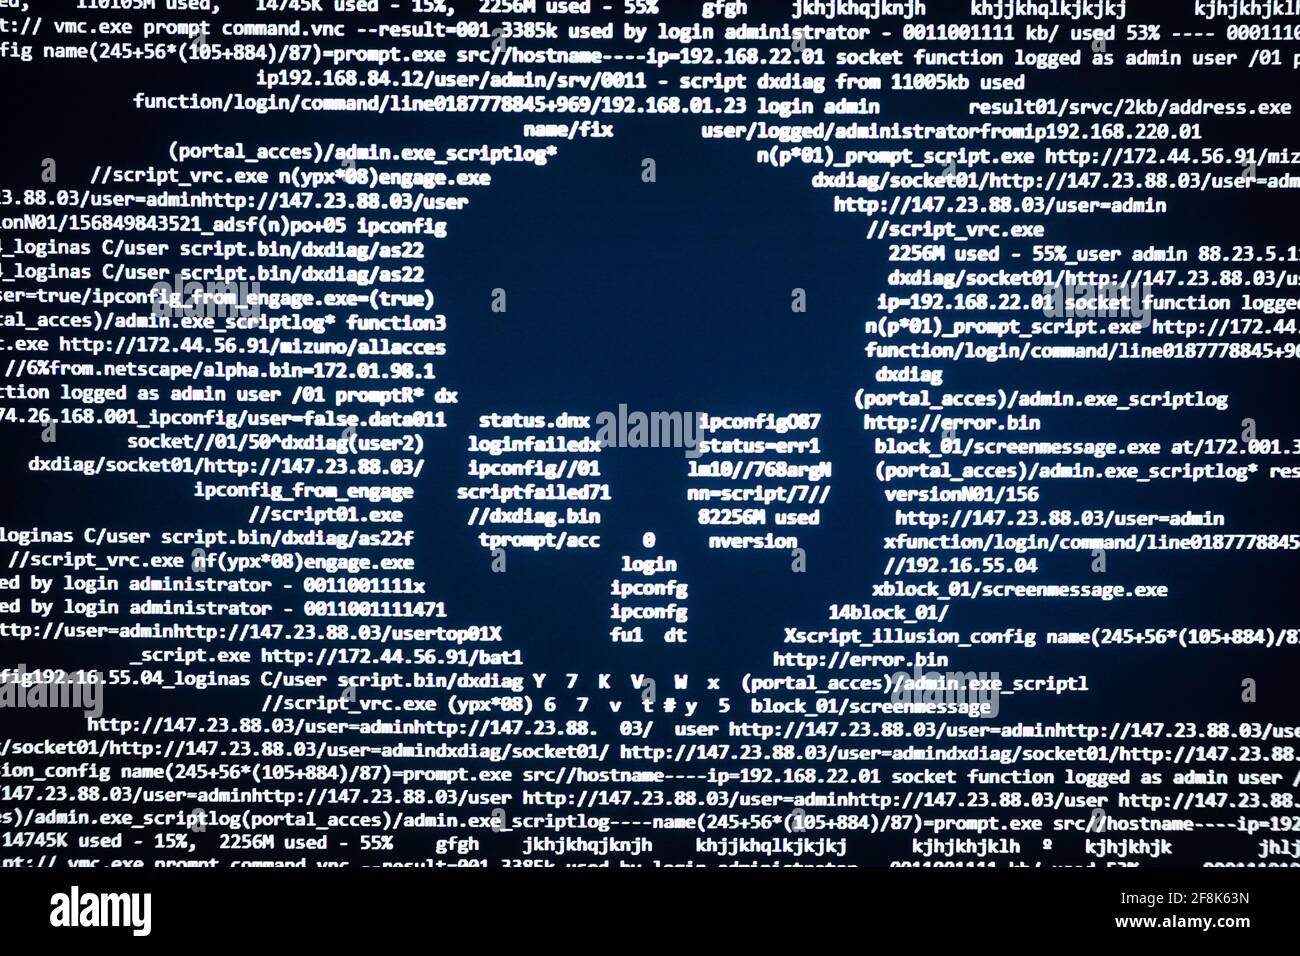 Hacker attack message in computer Stock Photo